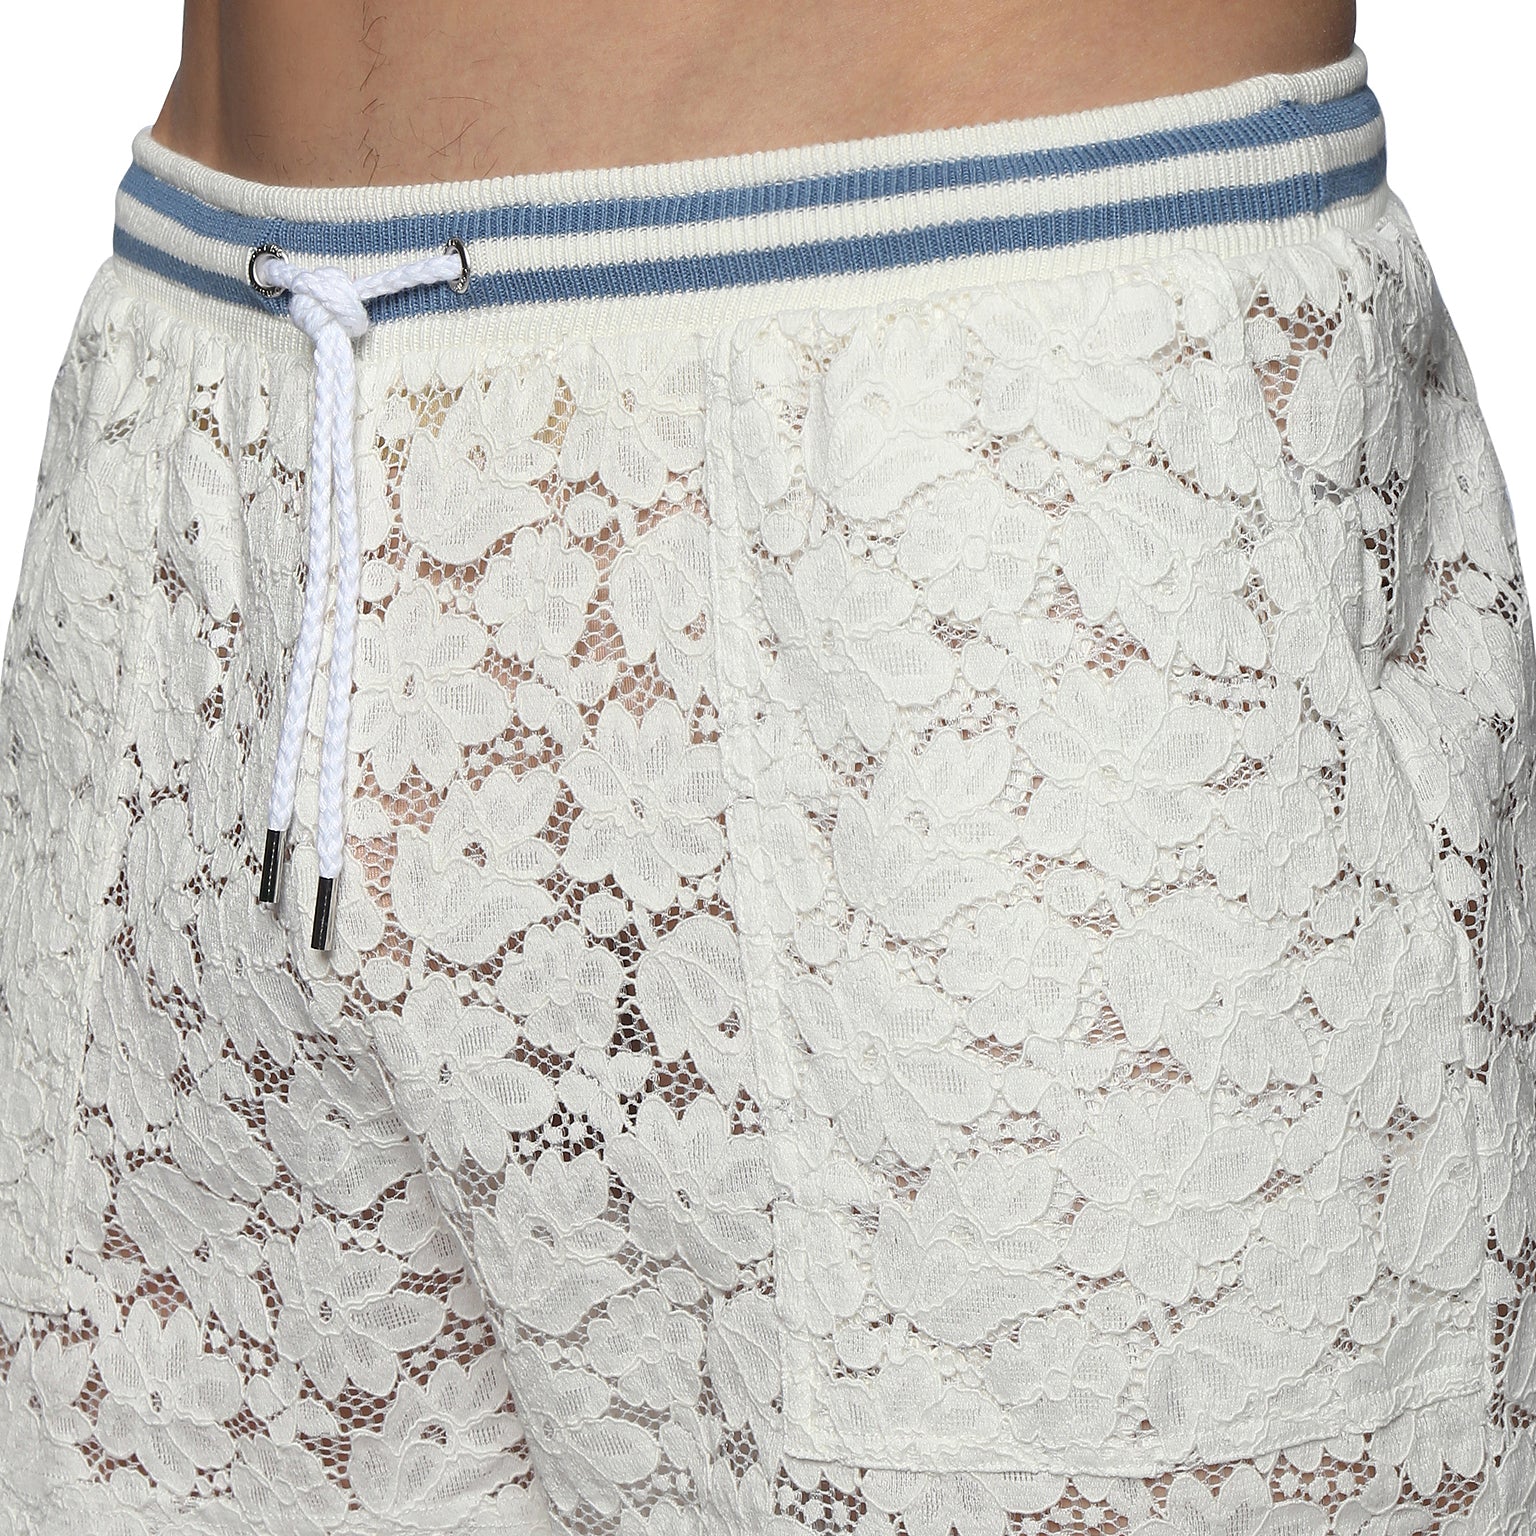 SPRING '24- White San Marco Stretch Lace Short